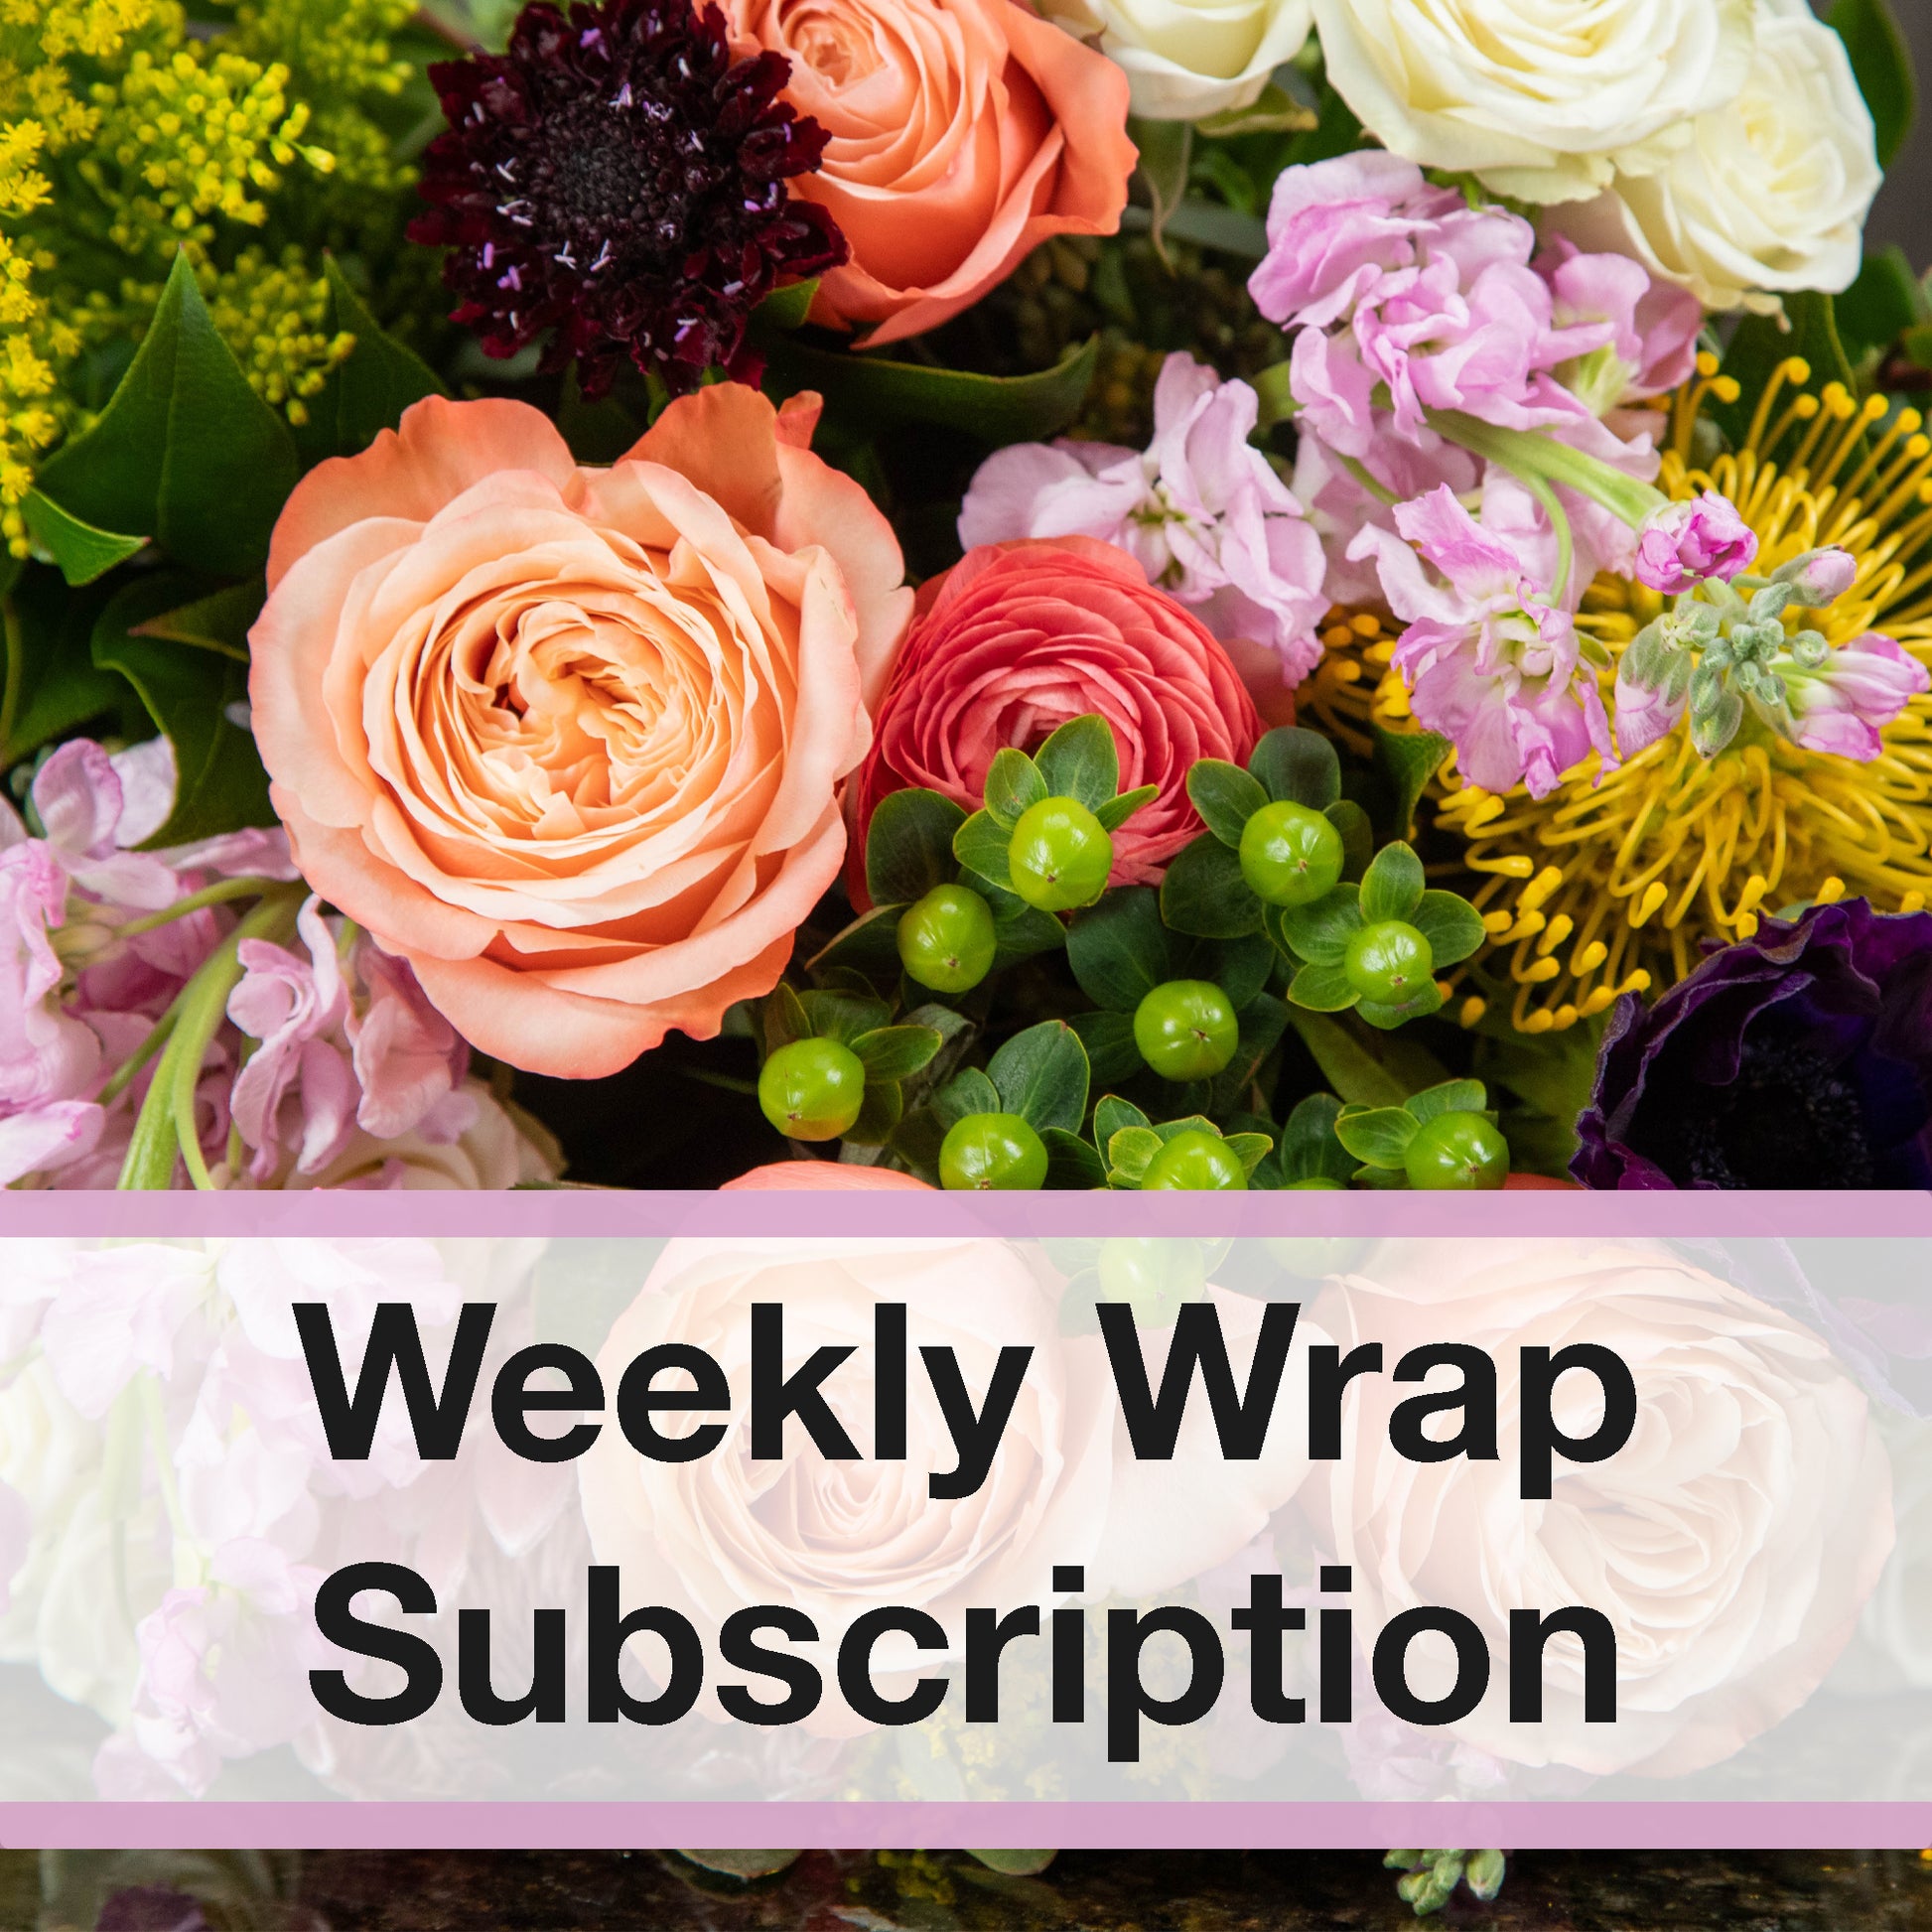 "weekly wrap subscription" written below a variety of colorful flowers